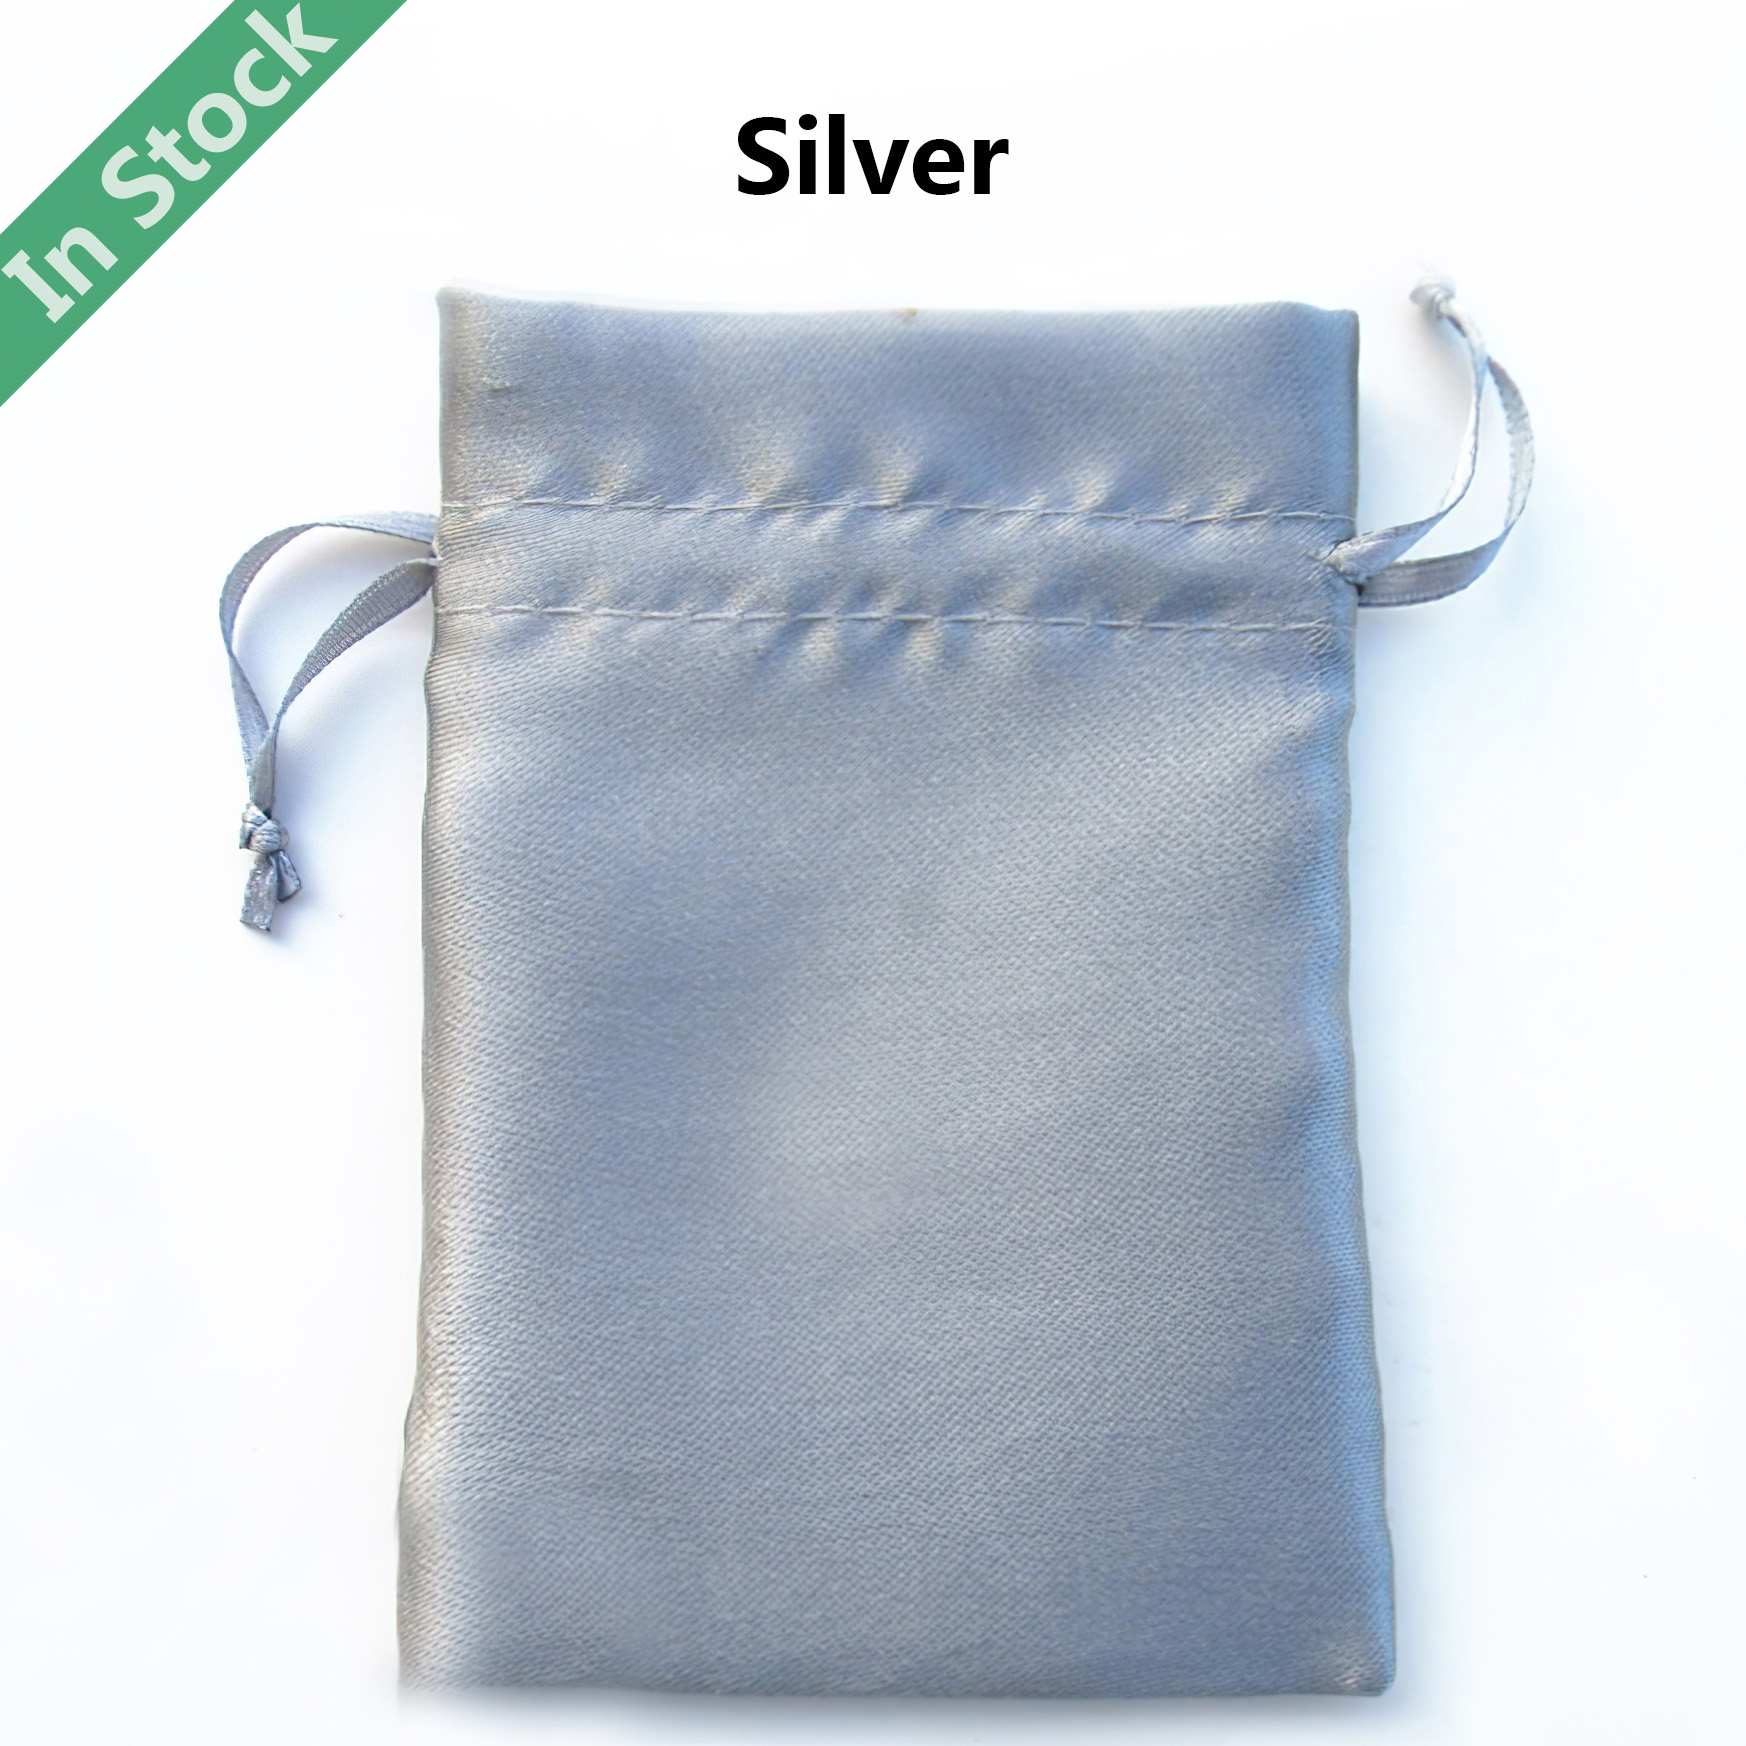 Wholesale Satin Silk Drawstring Bags Pouches in Stock, Silver